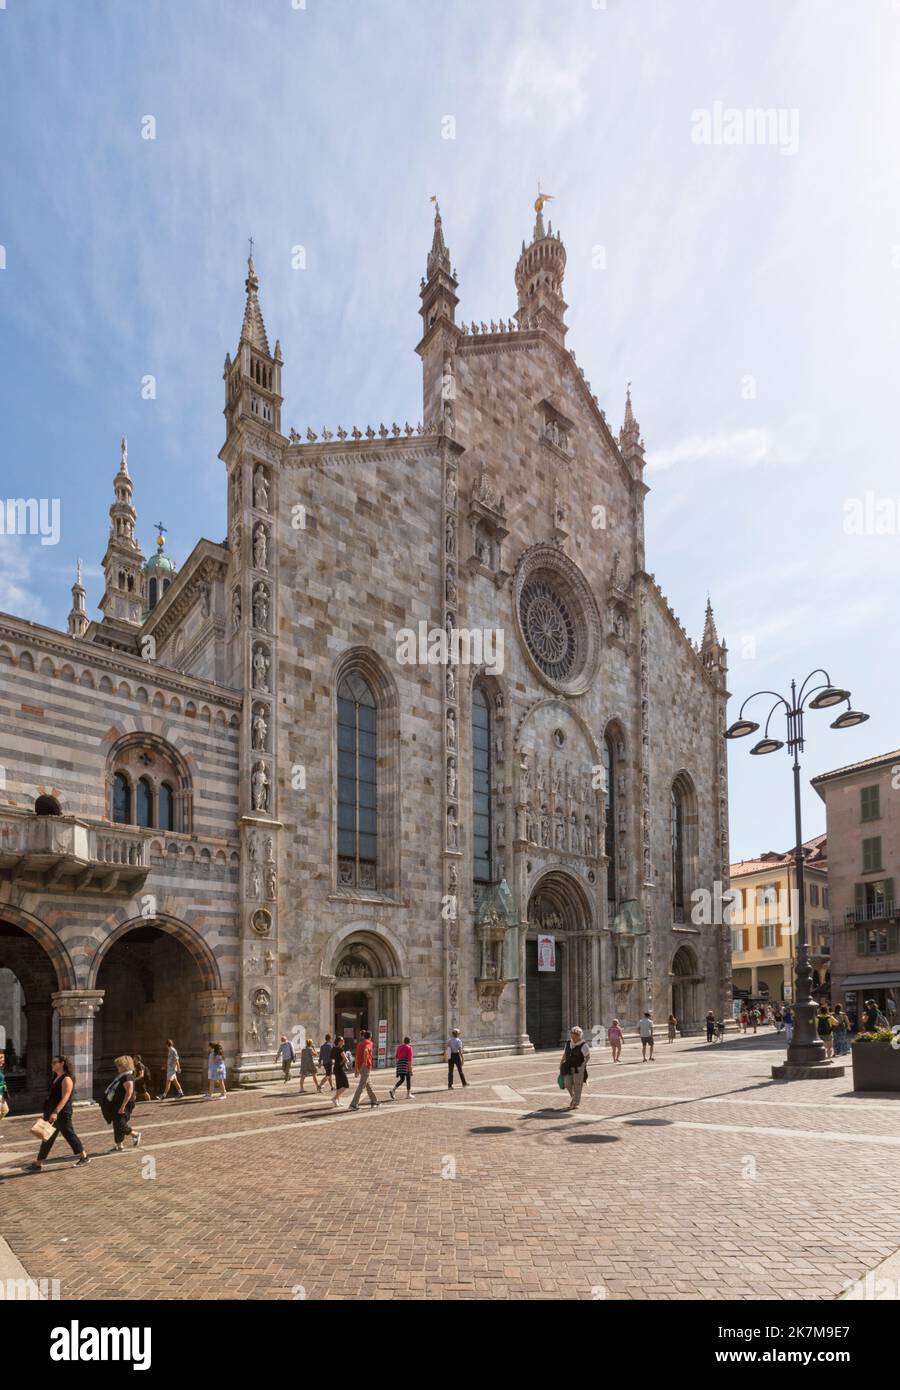 Main facade of the gothic style Cathedral on a sunny day. People on the square in front. Stock Photo